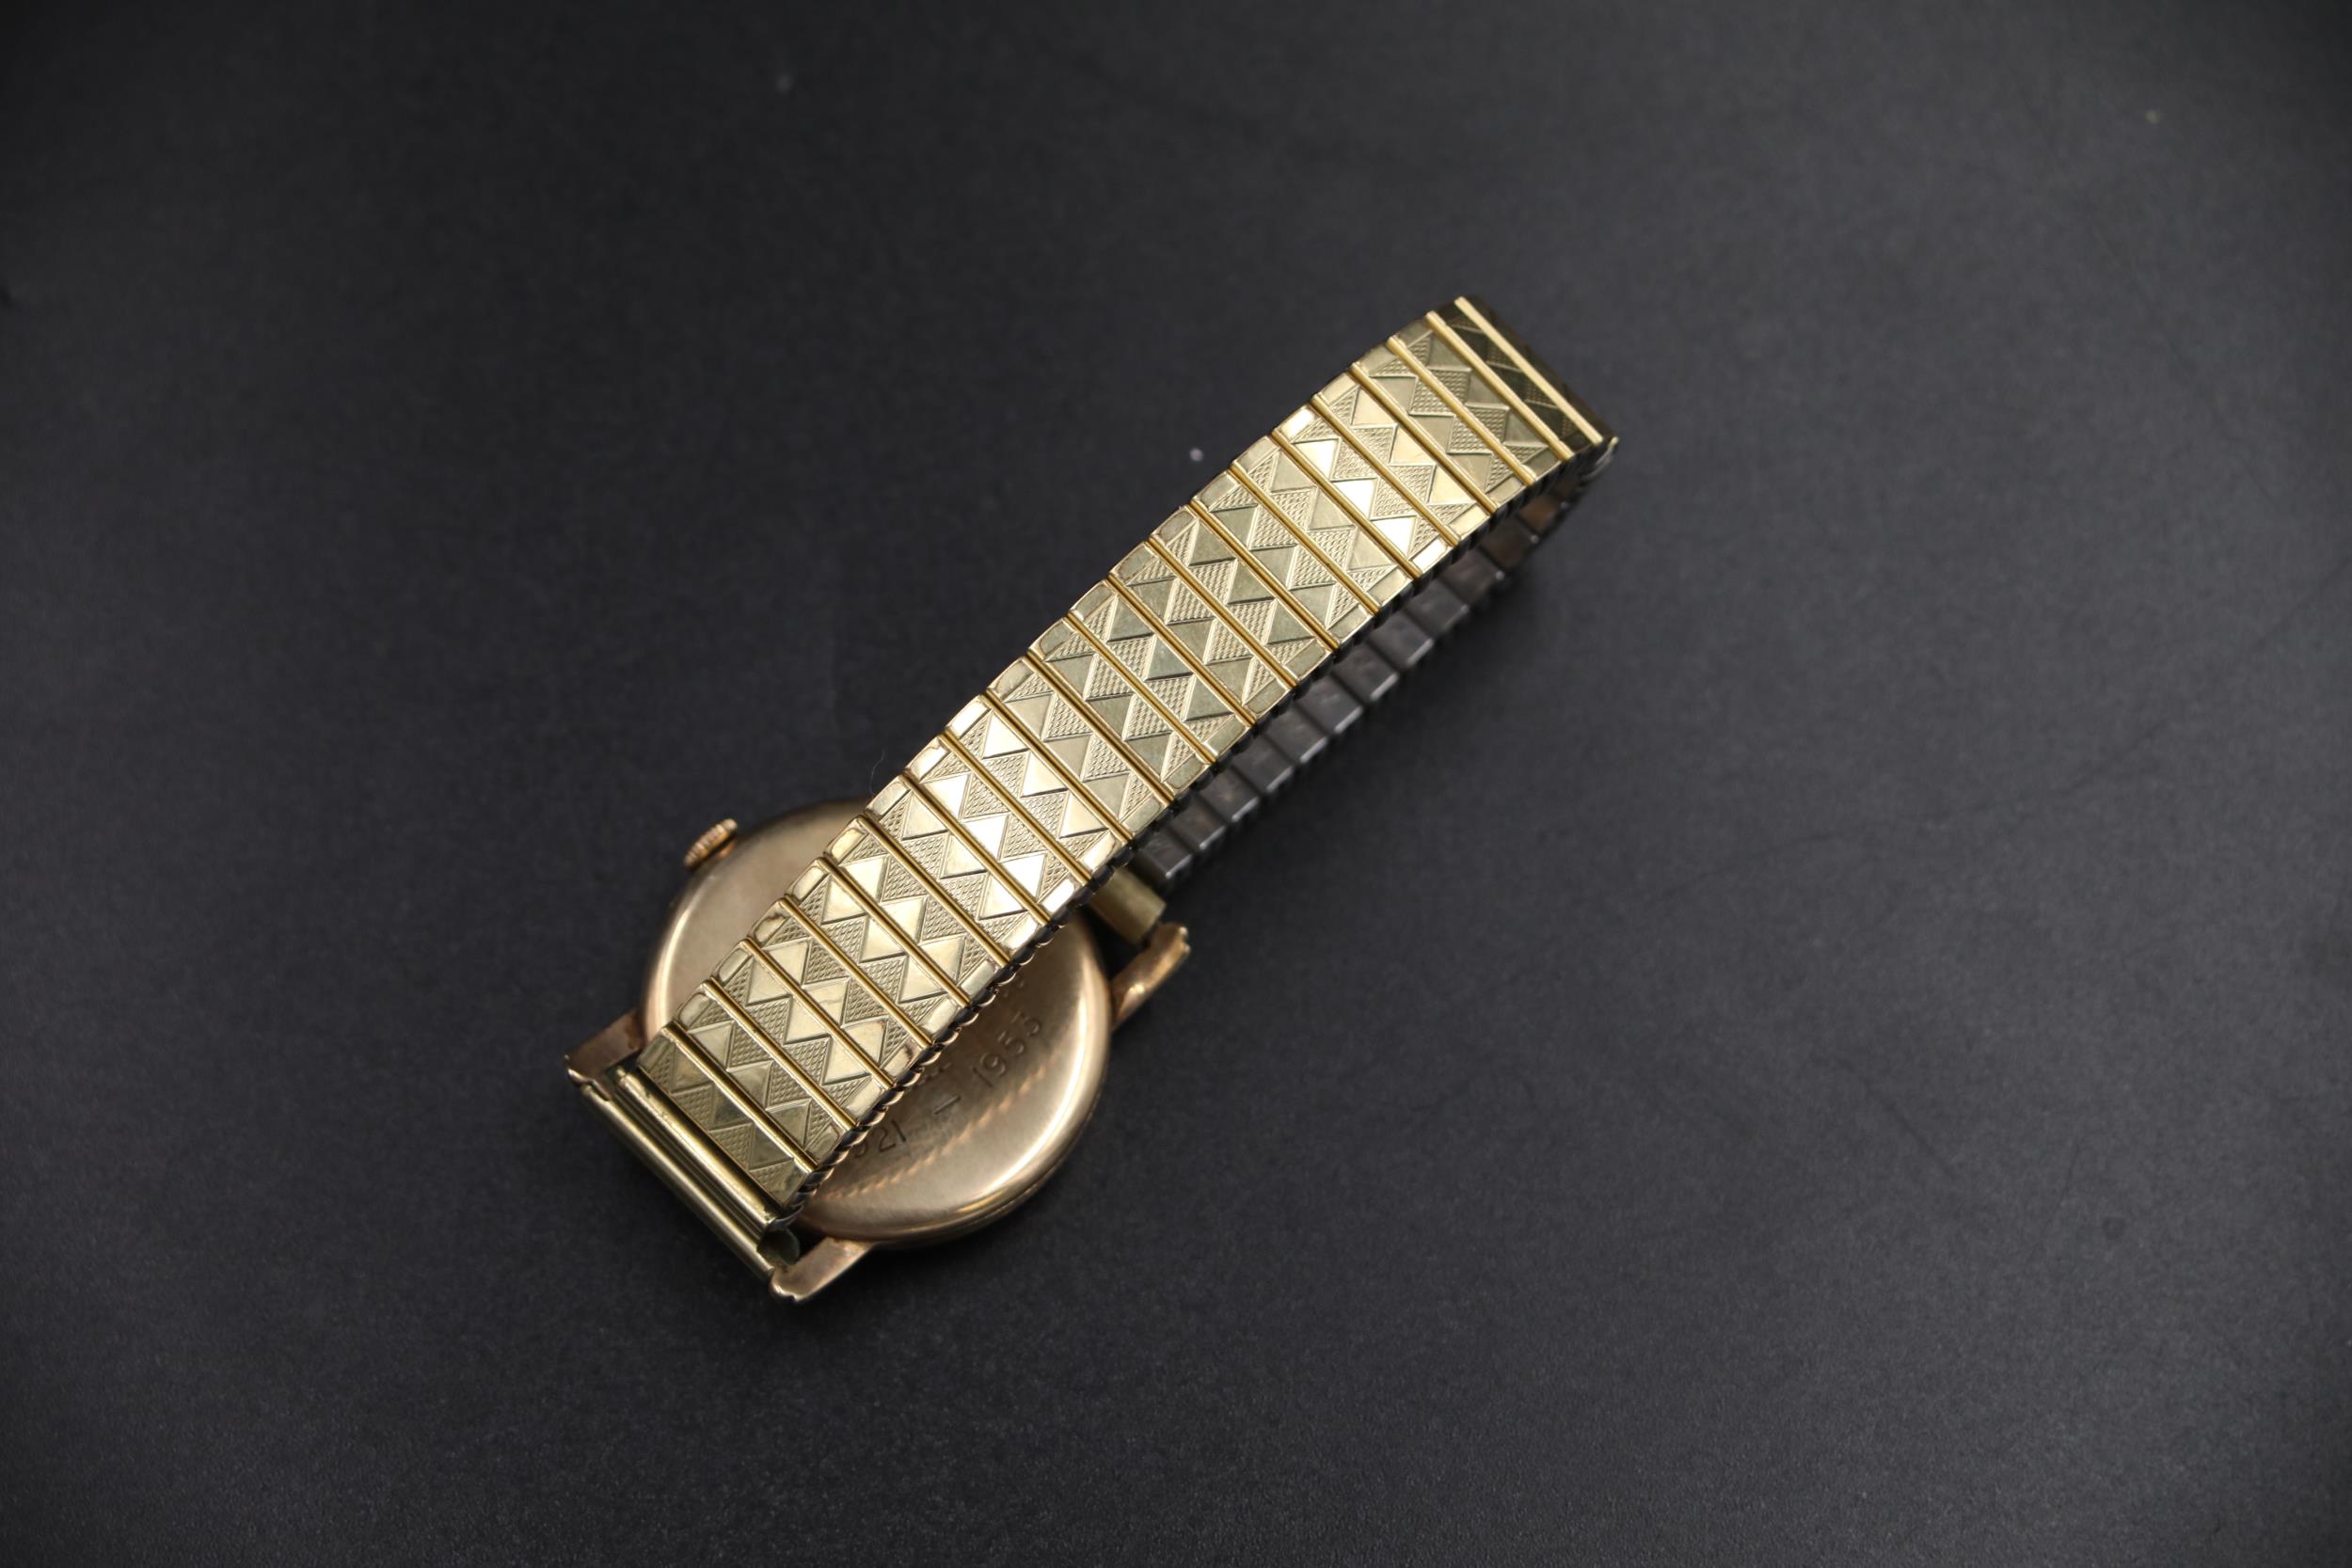 Men's 9ct gold watch circa 1952 Vintage Timor Perry, Birmingham. In working and clean condition. - Image 2 of 8